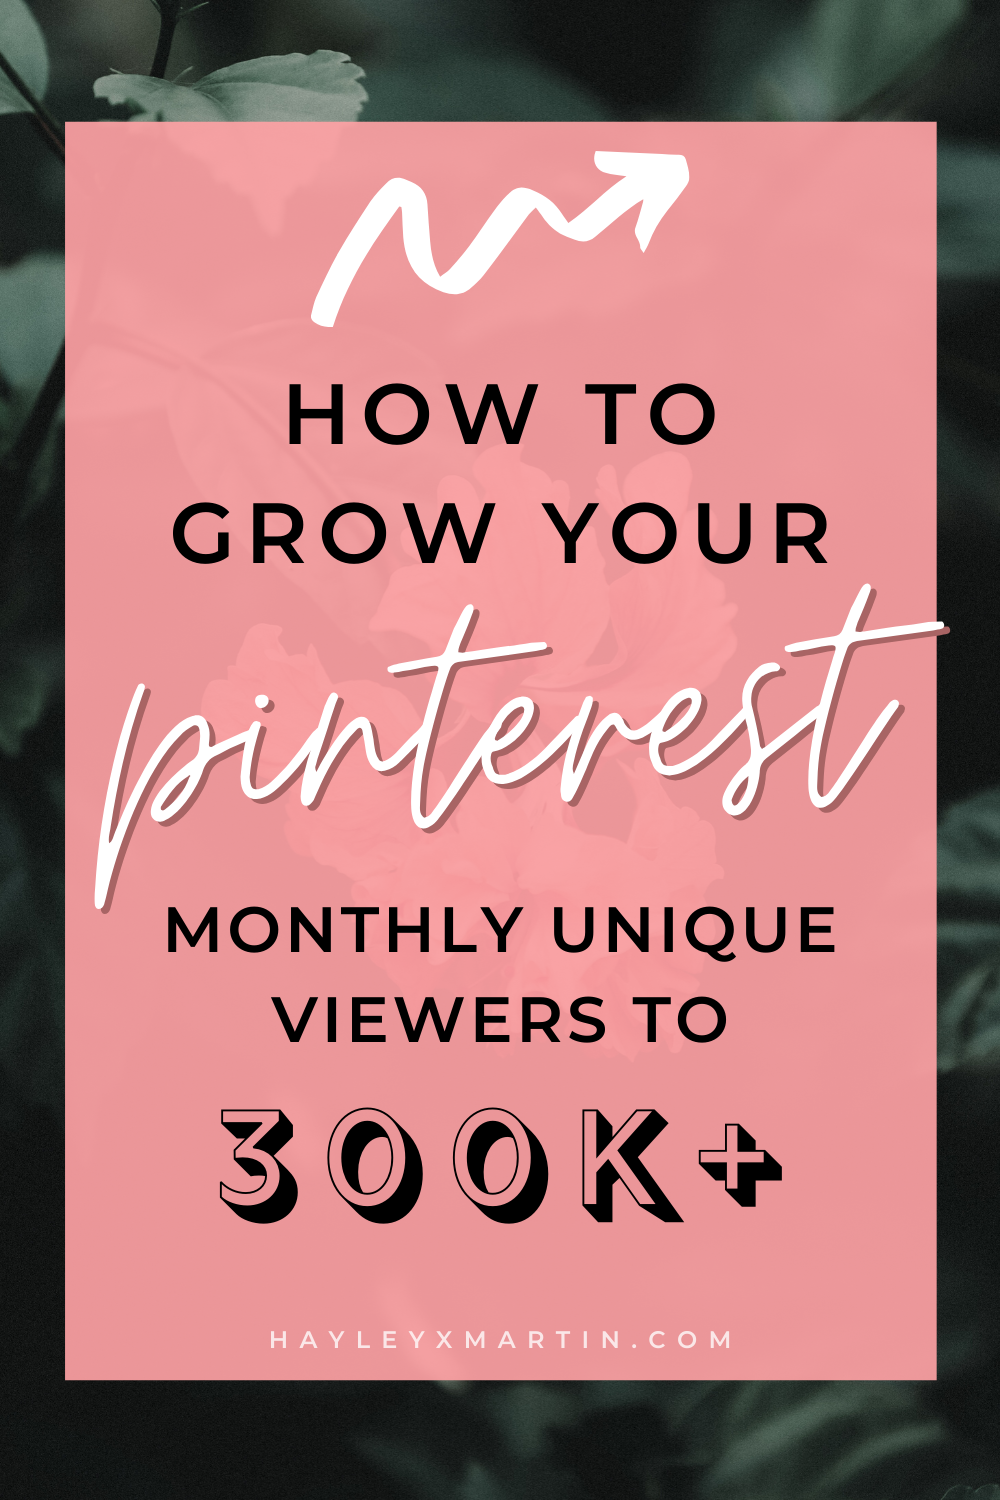 INCREASE YOUR PINTEREST MONTHLY VIEWERS TO 300K+ | HAYLEYXMARTIN